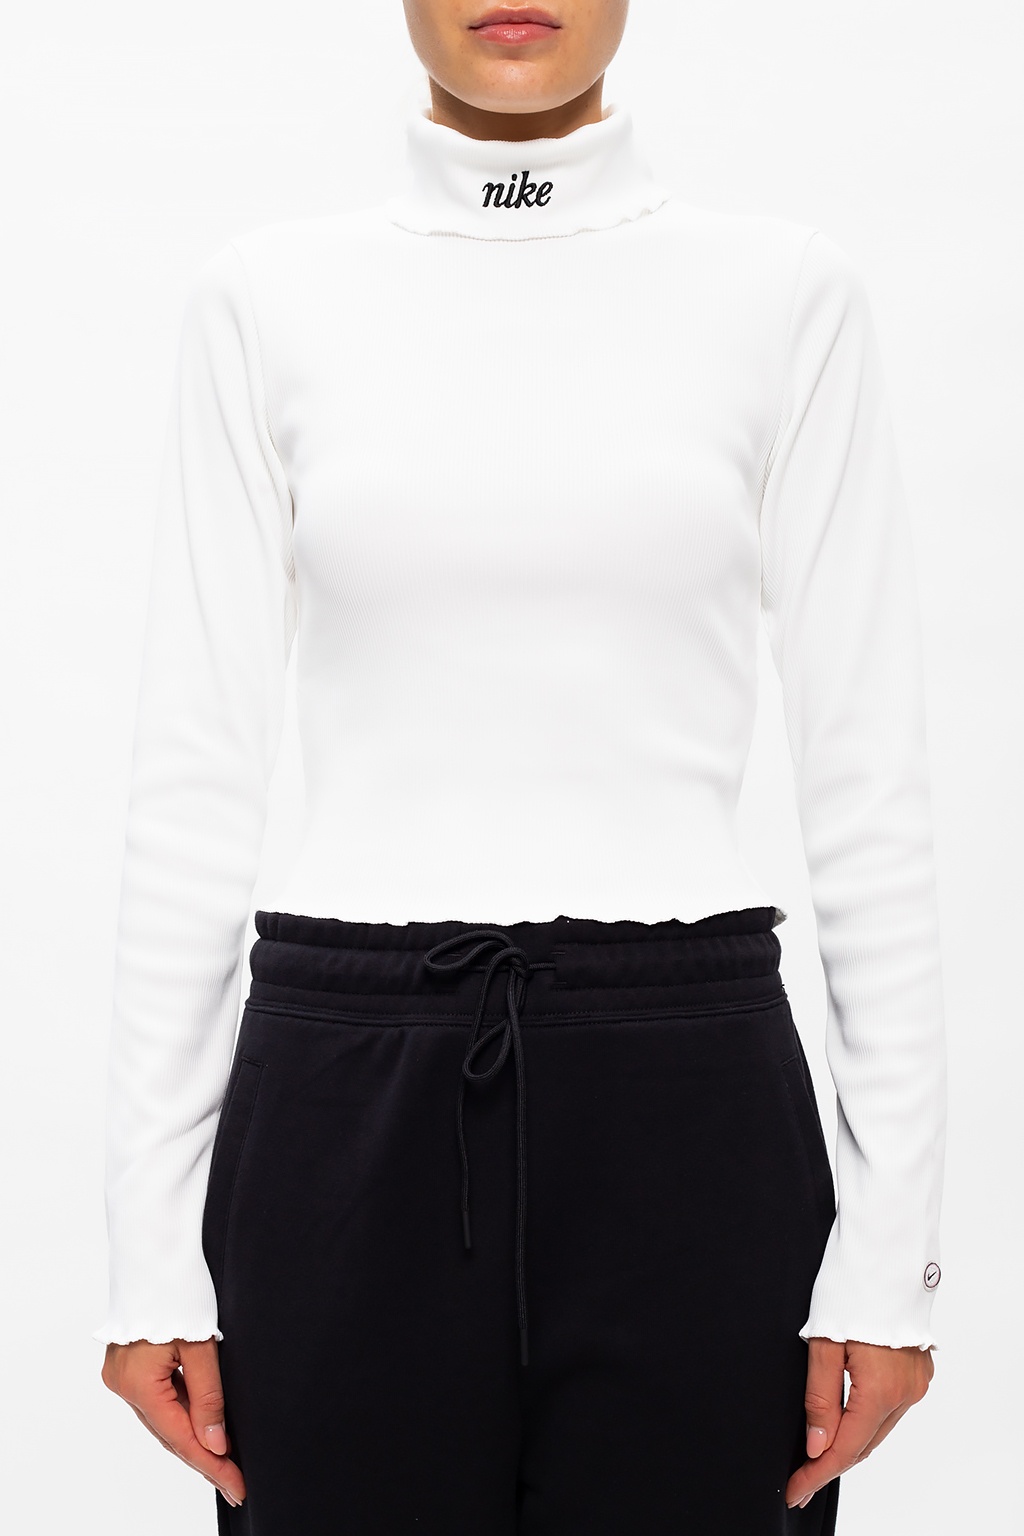 Ribbed turtleneck top with logo Nike 